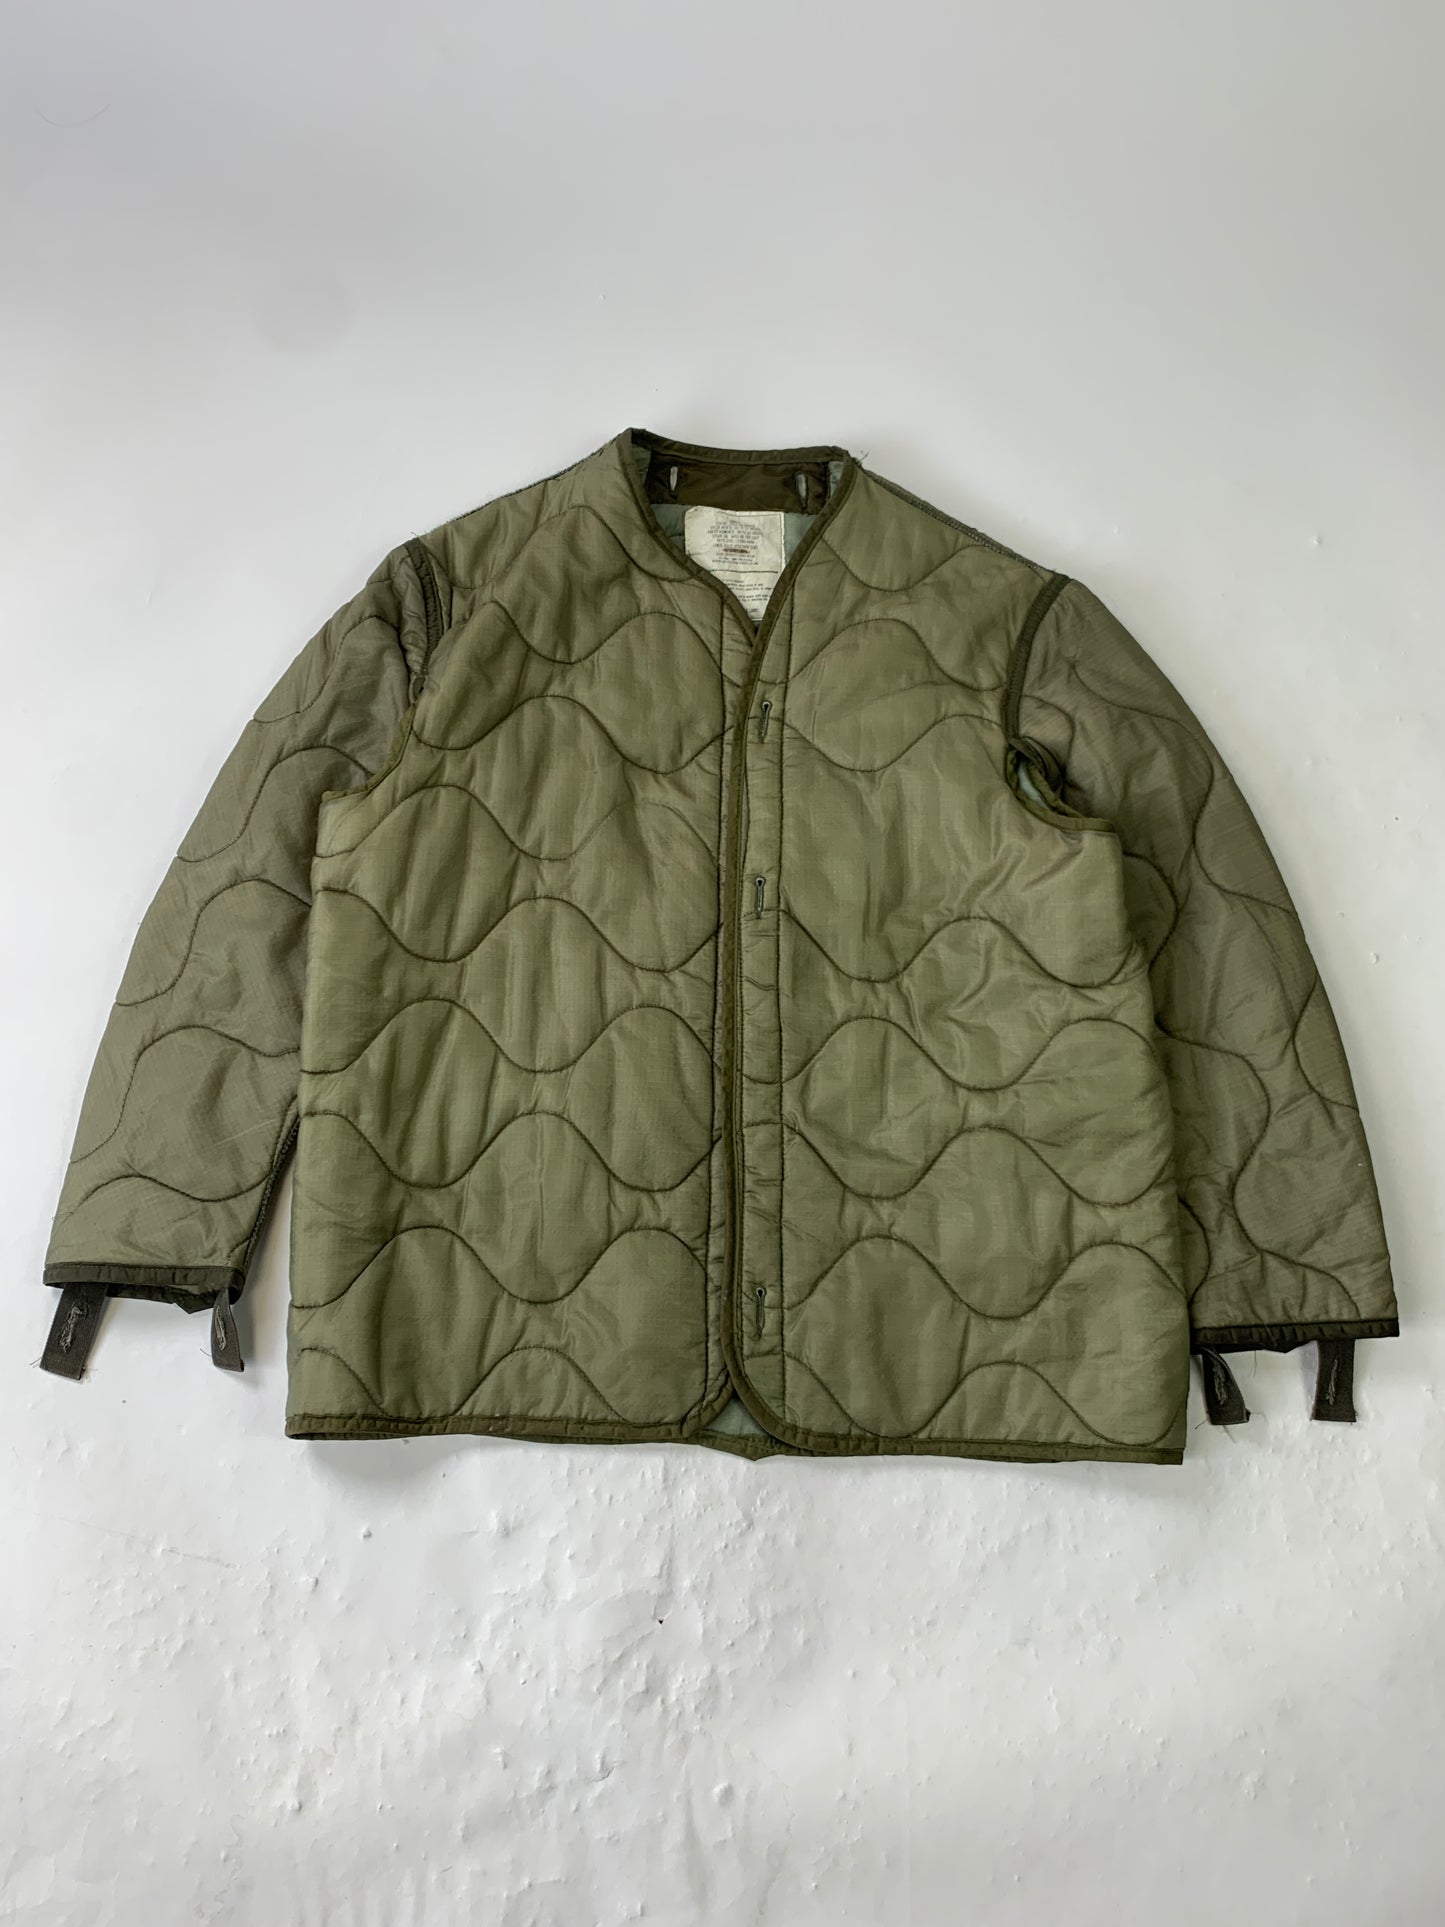 Army Vintage Quilted Liner Jacket - XL